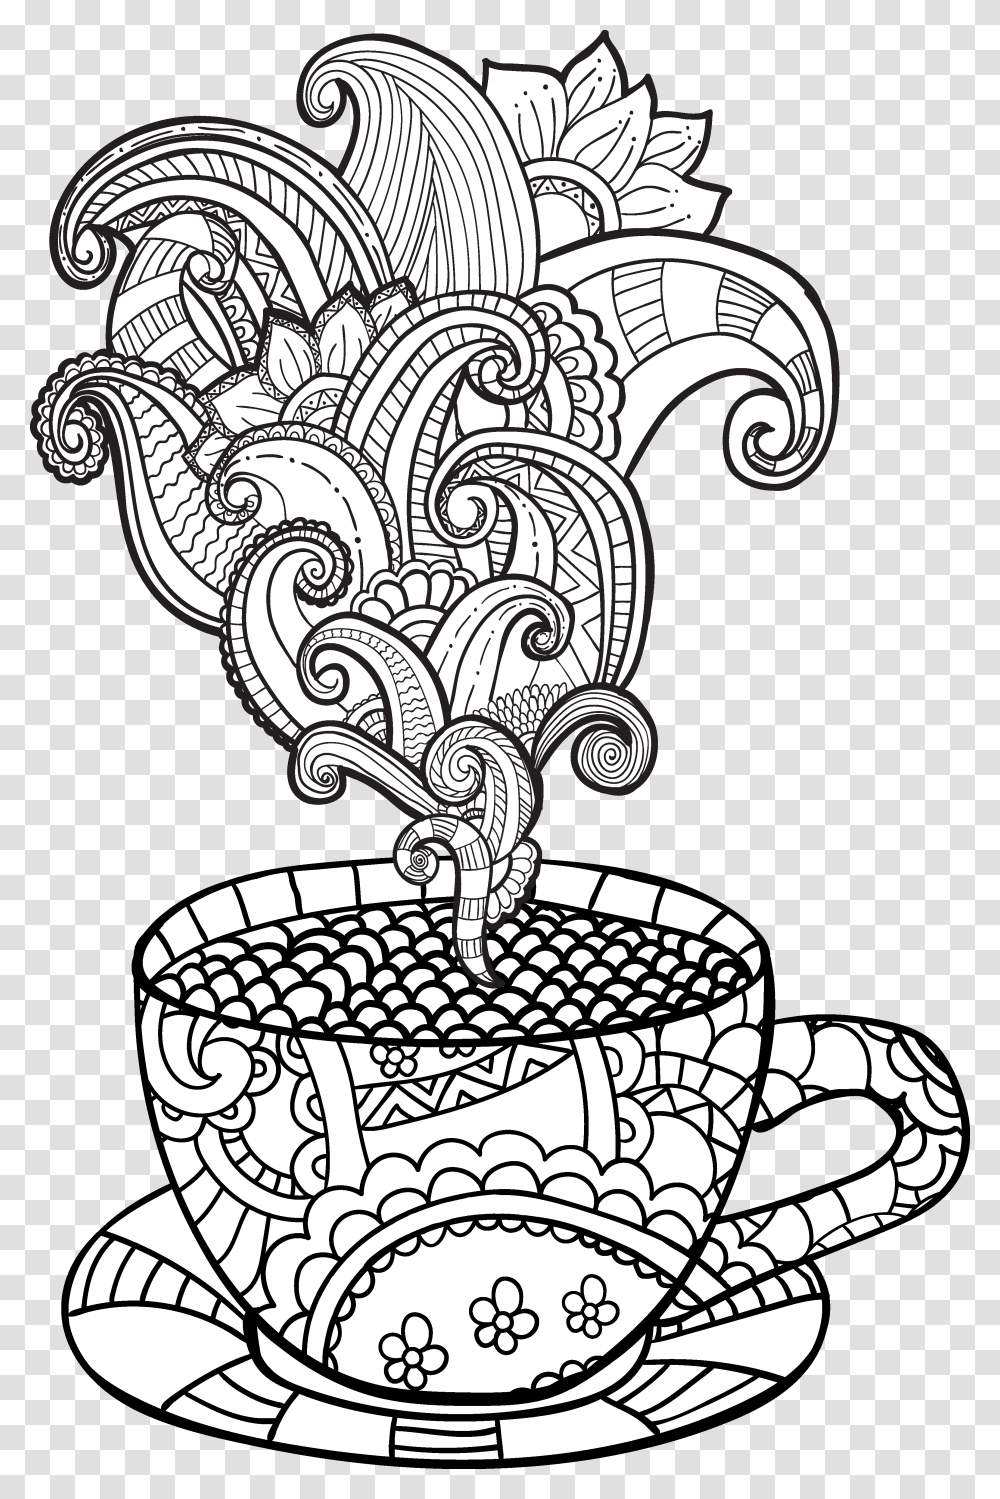 Drawn Tea Cup Coffee Coloring Pages For Adults, Pattern, Paisley, Cross Transparent Png